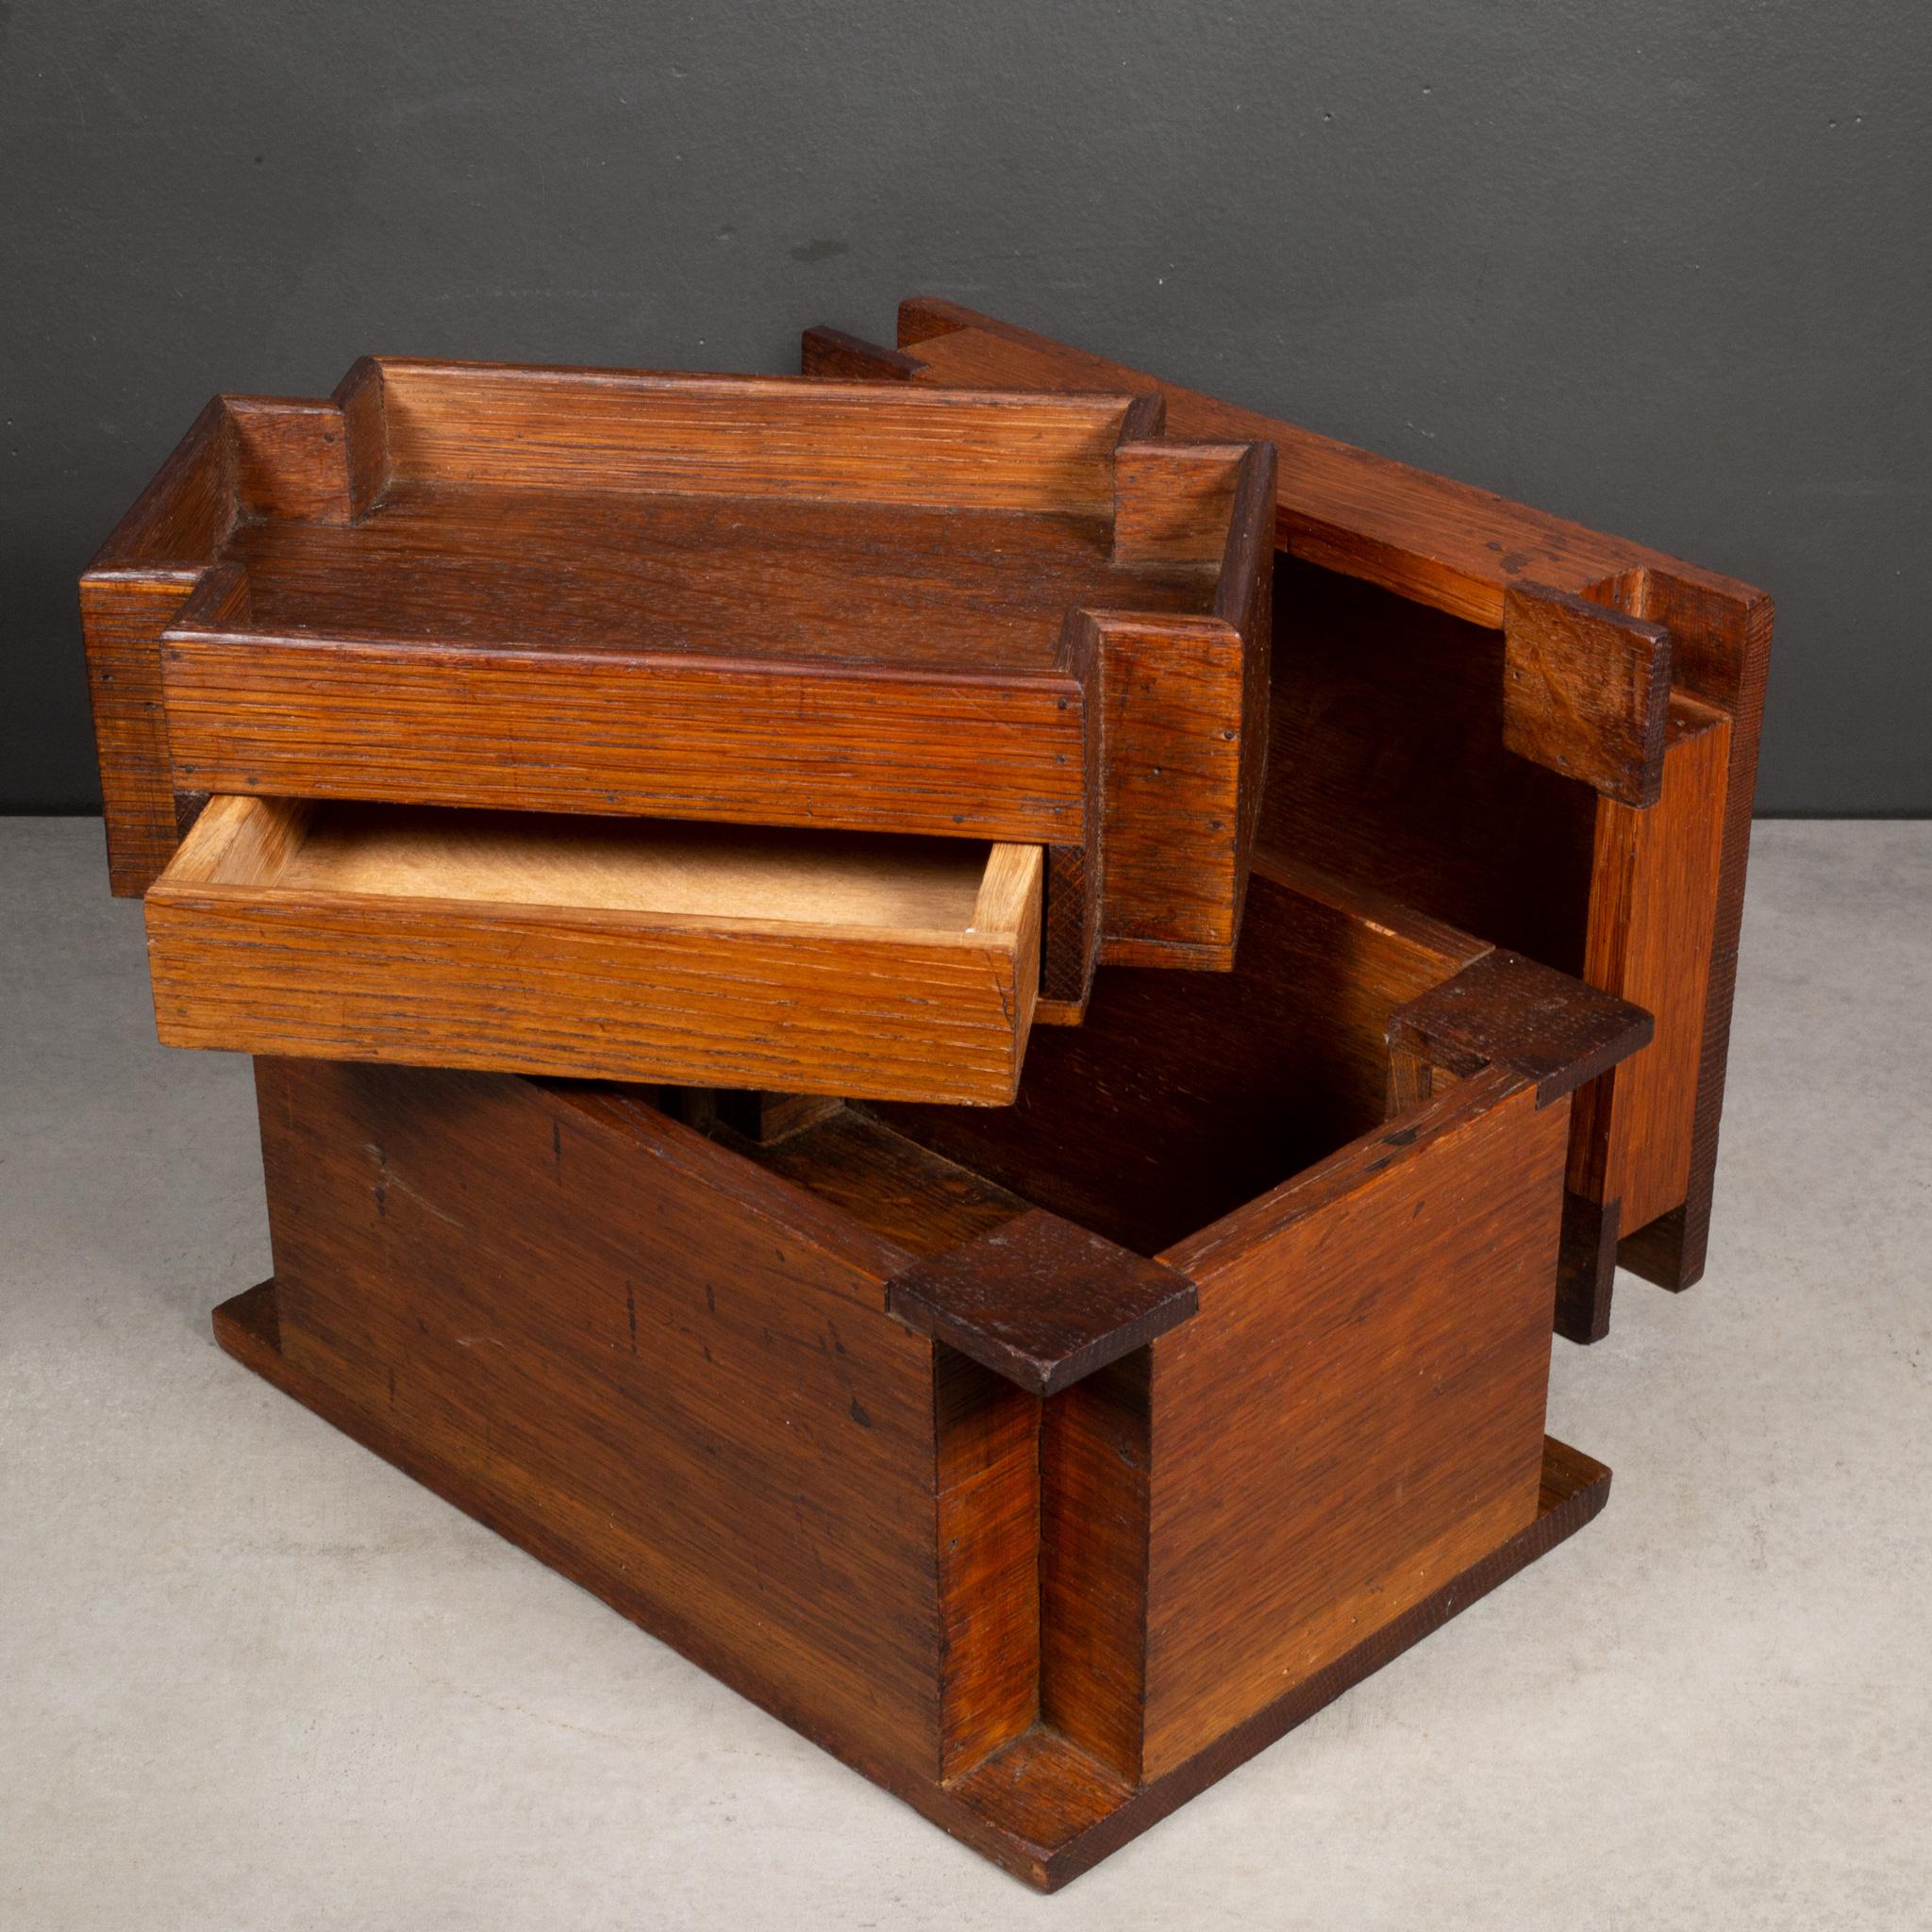 ABOUT

A late 19th/early 20th century handmade wooden box with inner removable tray and secret drawer. Solidly constructed with dovetail joints. 

    CREATOR Unknown.
    DATE OF MANUFACTURE c.1880-1920. 
    MATERIALS AND TECHNIQUES Wood.
   